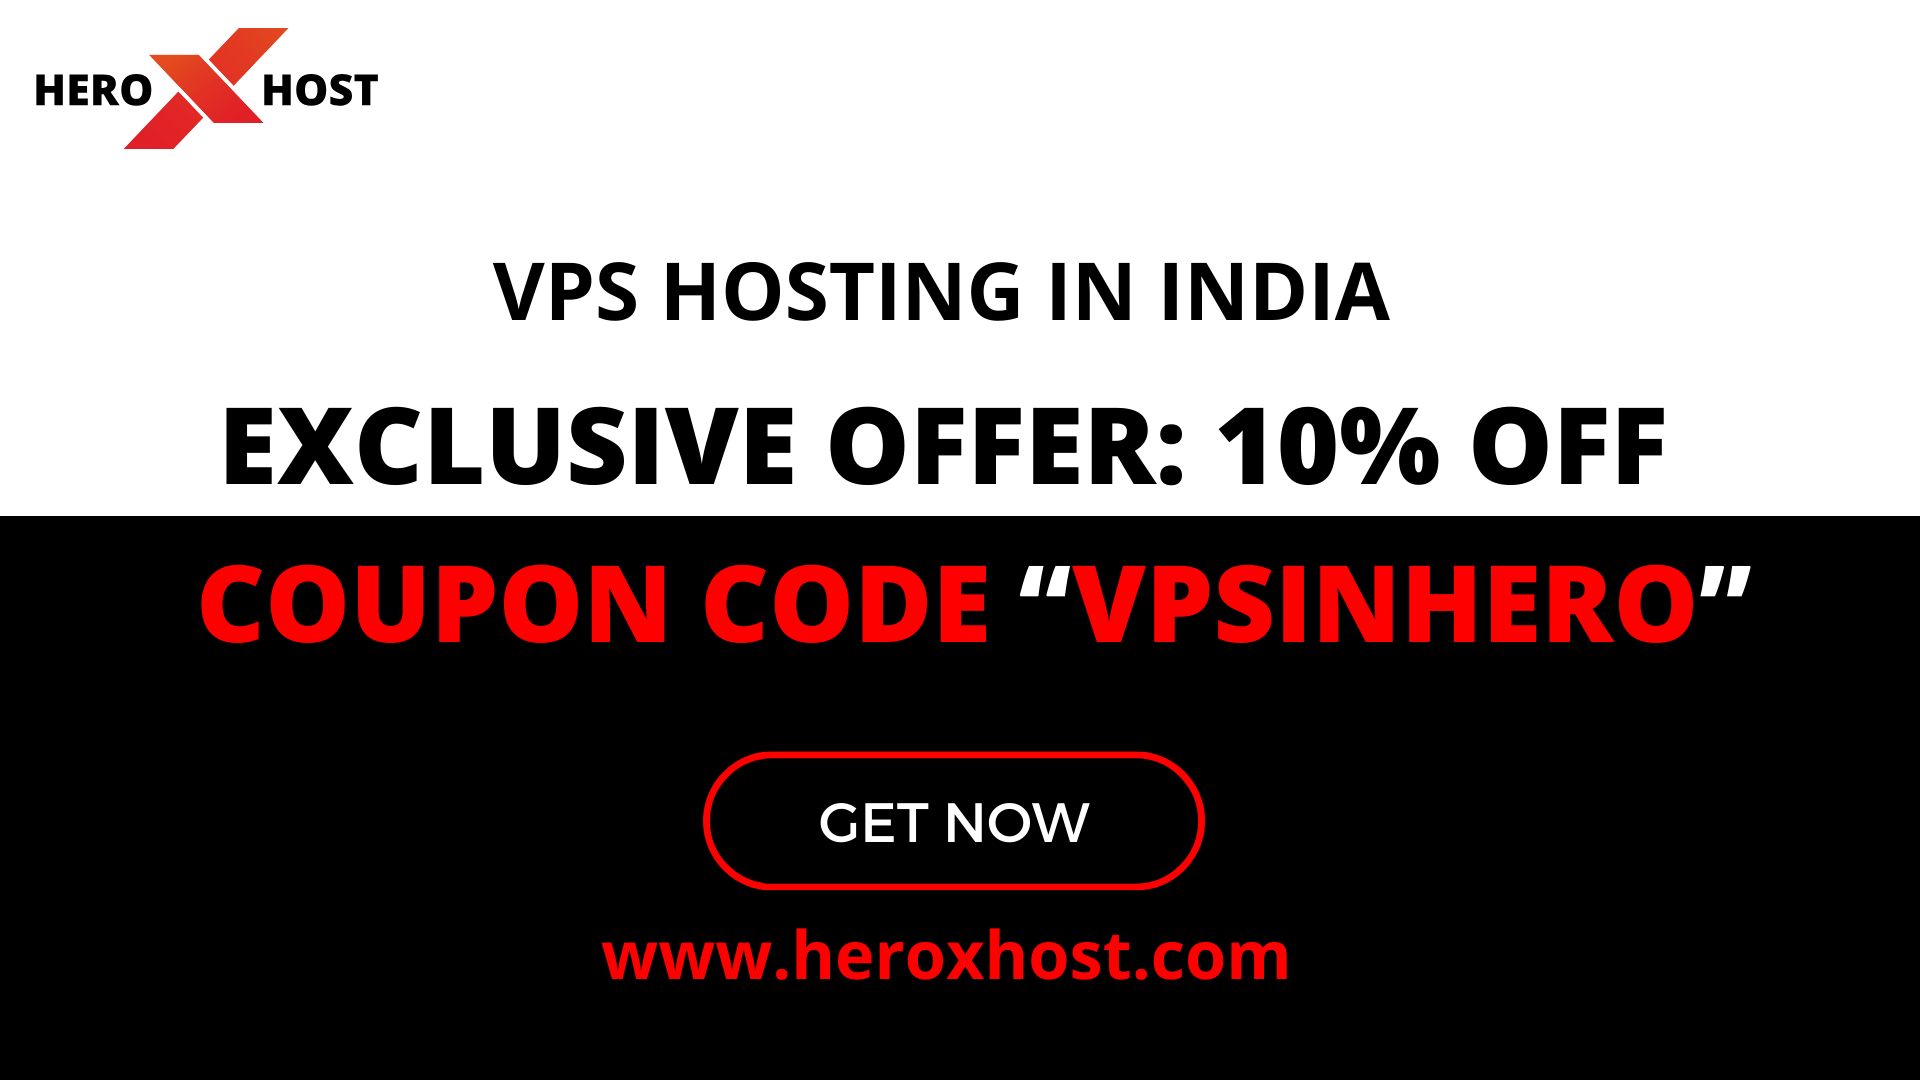 Heroxhost VPS Hosting Exclusive Offer: 10% Off with Coupon Code “VPSINHERO“